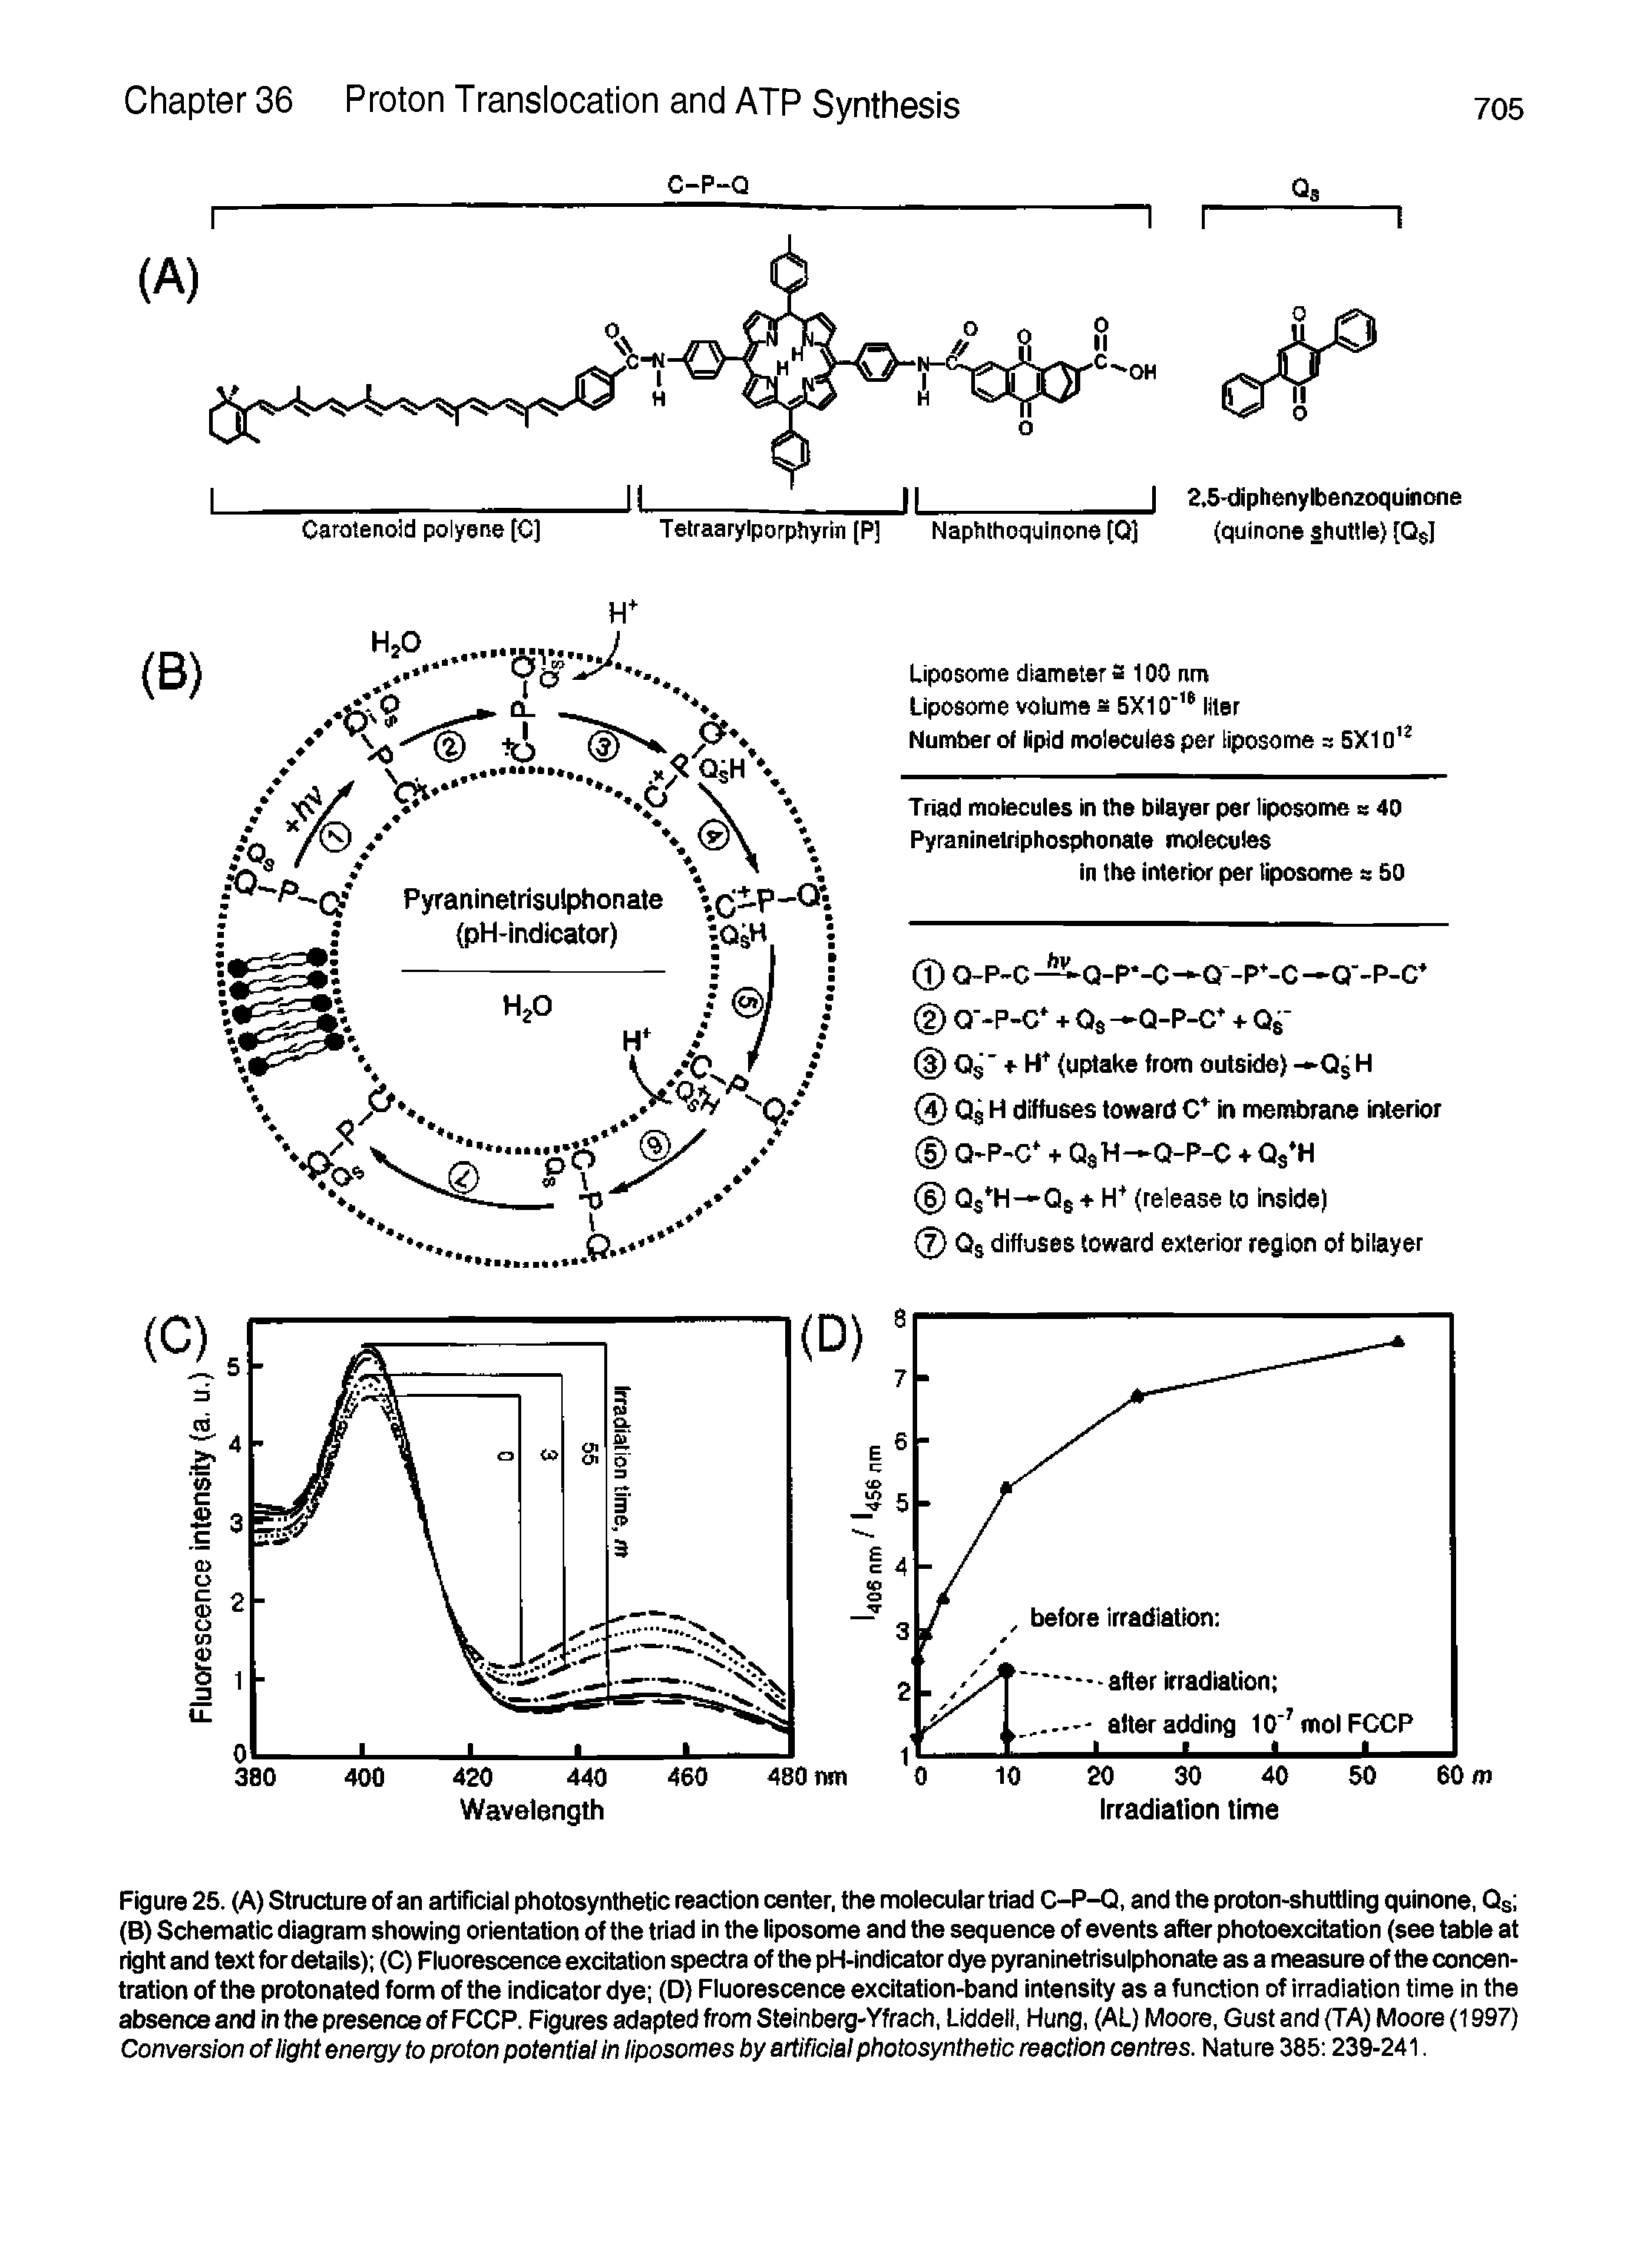 Figure 25. (A) Structure of an artificial photosynthetic reaction center, the molecular triad C-P-Q, and the proton-shuttling quinone, Qsl (B) Schematic diagram showing orientation of the triad In the liposome and the sequence of events after photoexcitation (see table at right and text for details) (C) Fluorescence excitation spectra of the pH-indicator dye pyraninetrisulphonate as a measure of the concentration of the protonated form of the indicator dye (D) Fluorescence excitation-band intensity as a function of irradiation time in the absence and in the presence of FCCP. Figures adapted from Steinberg-Yfrach, Liddeii, Hung, (AL) Moore, Gust and (TA) Moore (1997) Conversion of light energy to proton potential in liposomes by artificial photosynthetic reaction centres. Natu re 385 239-241.